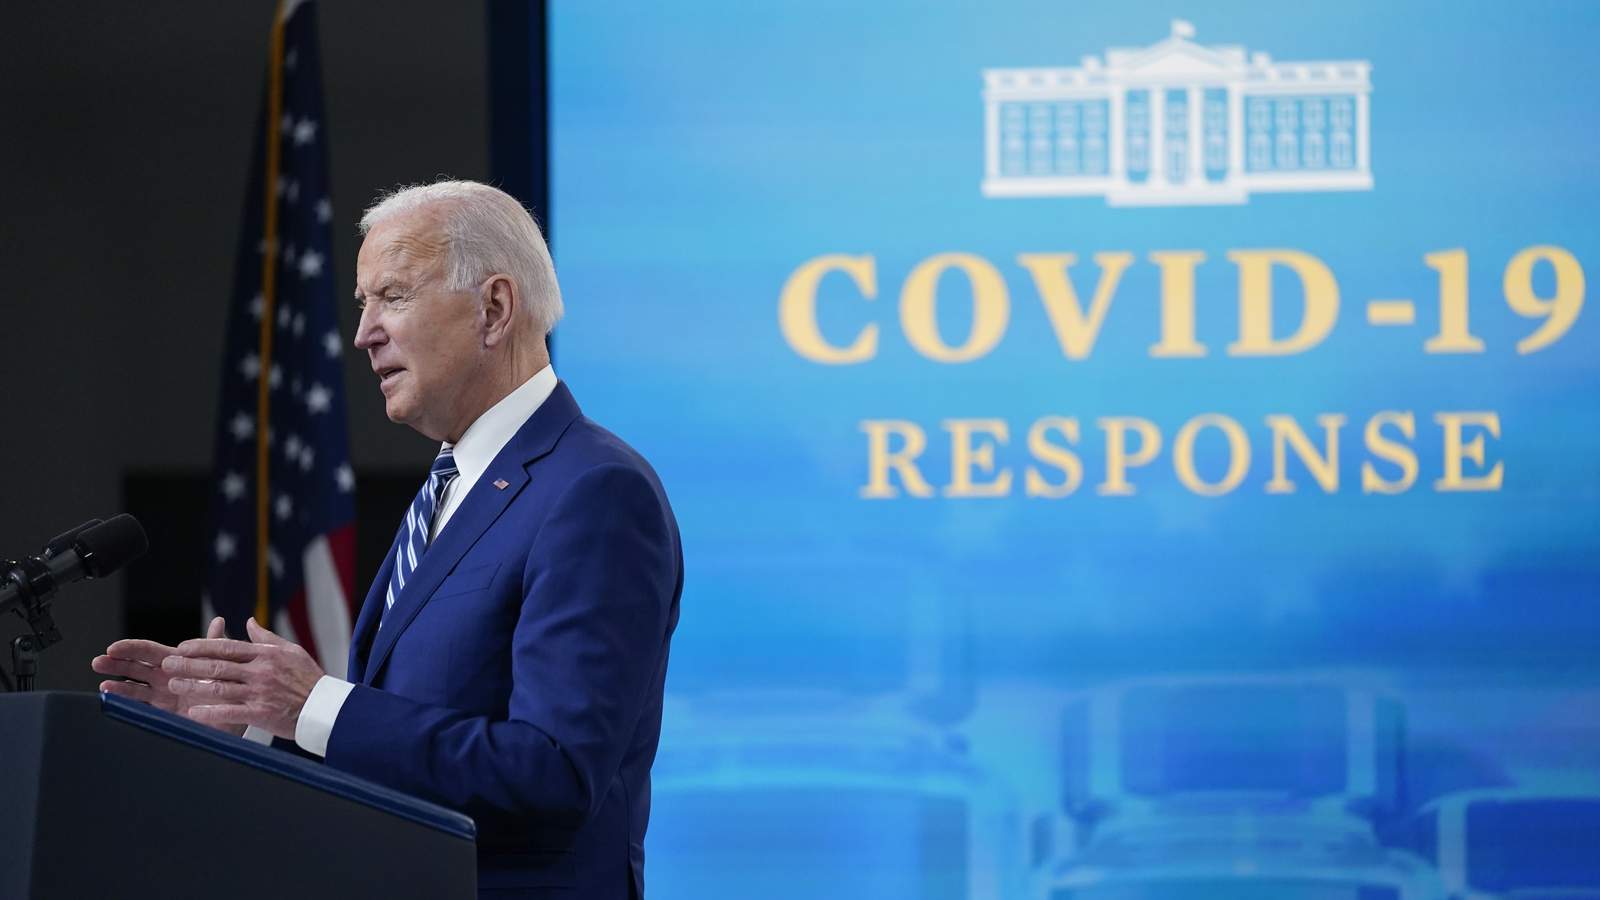 AP-NORC poll: Biden bolstered by strong marks on pandemic